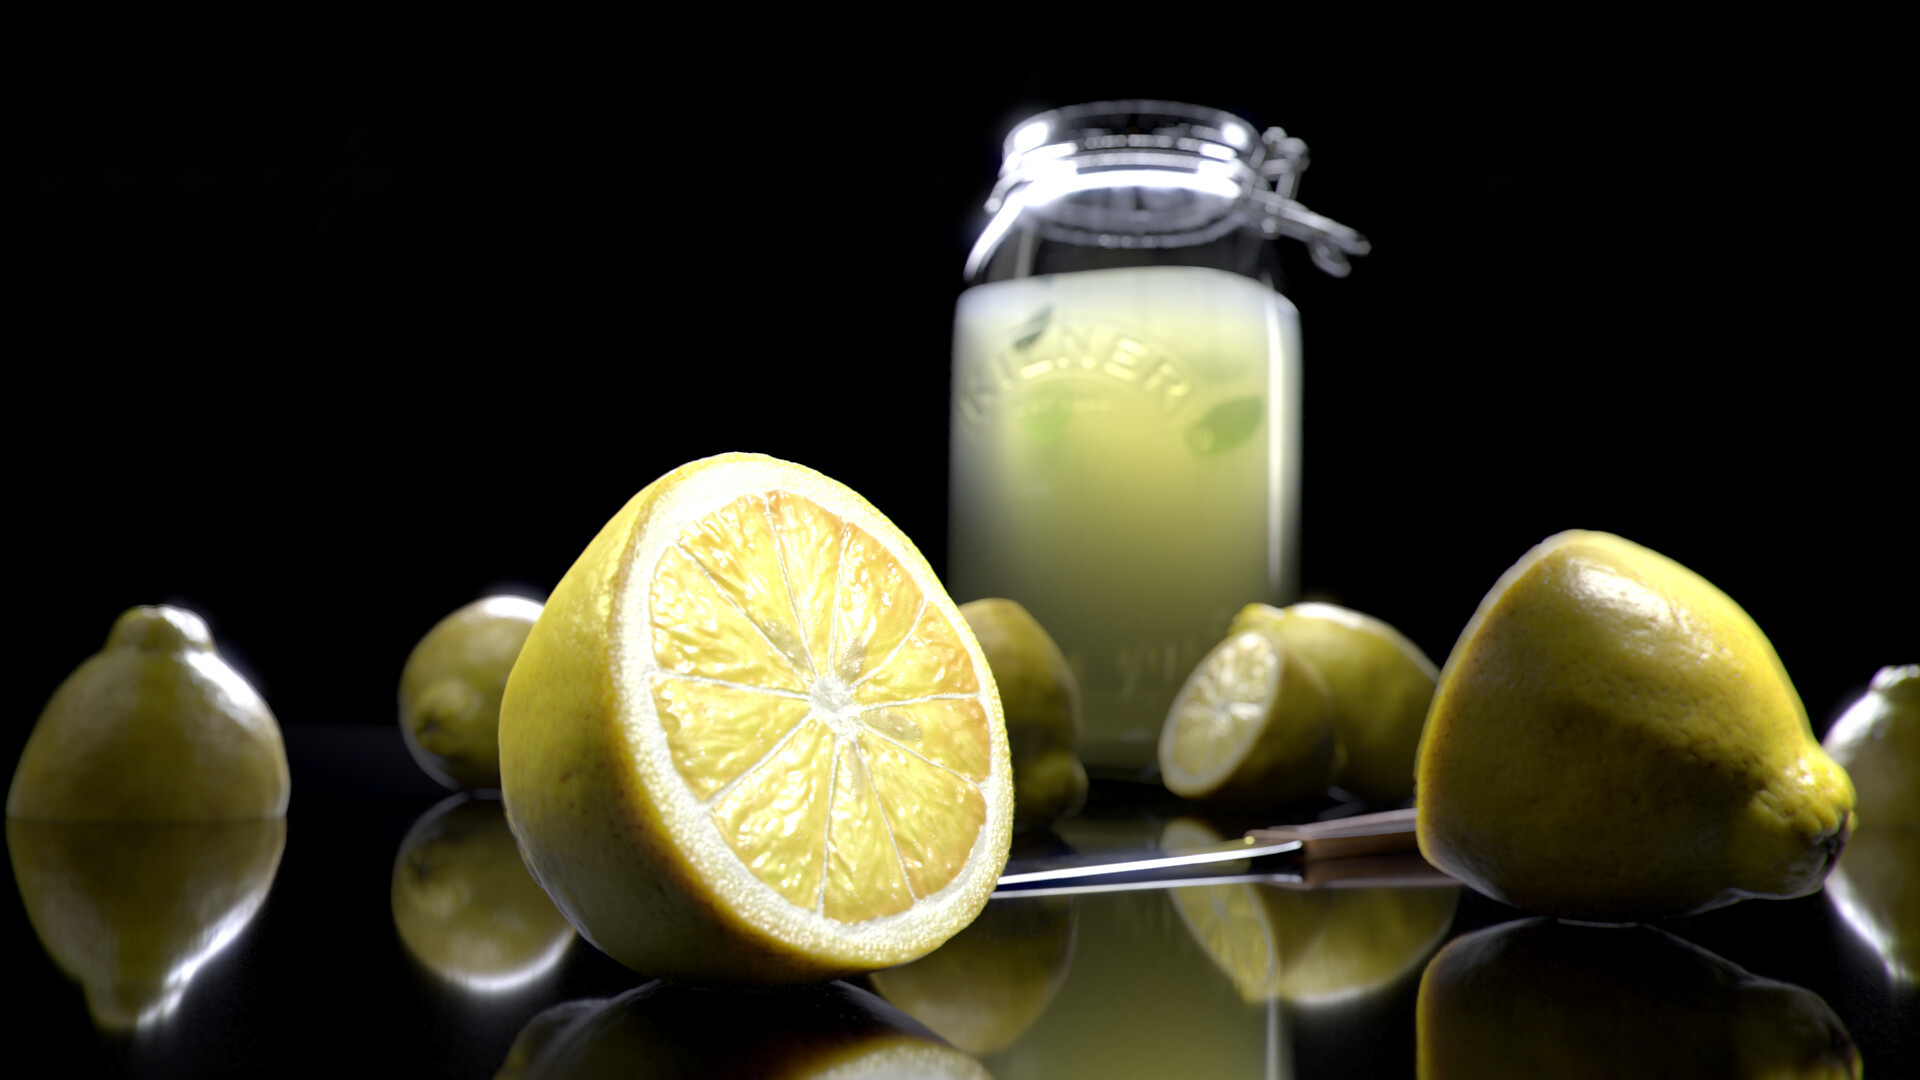 Lemonade: Cloudy drink, Non-carbonated and made with fresh citrus juice. 1920x1080 Full HD Background.